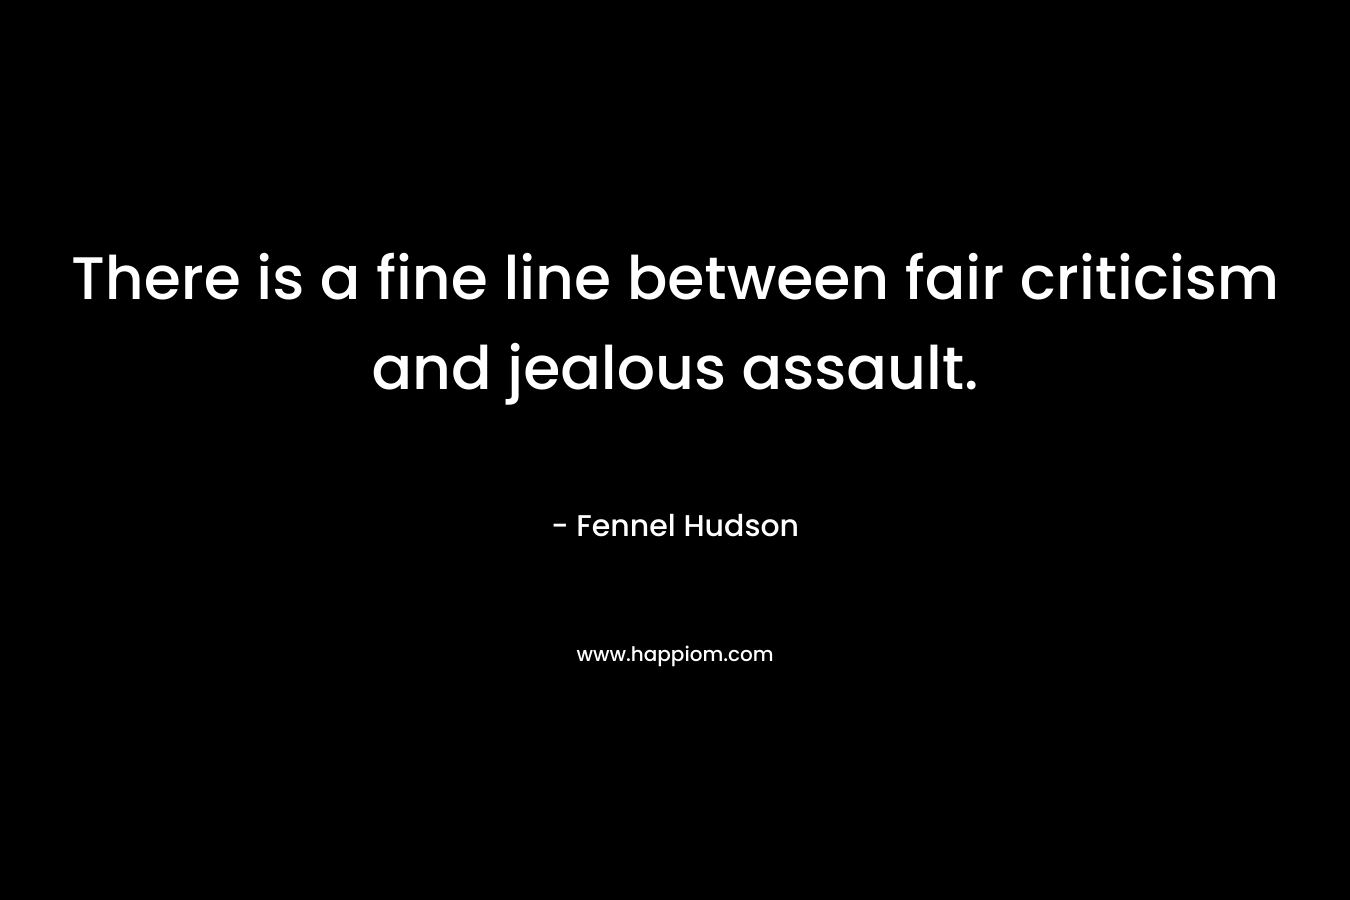 There is a fine line between fair criticism and jealous assault.